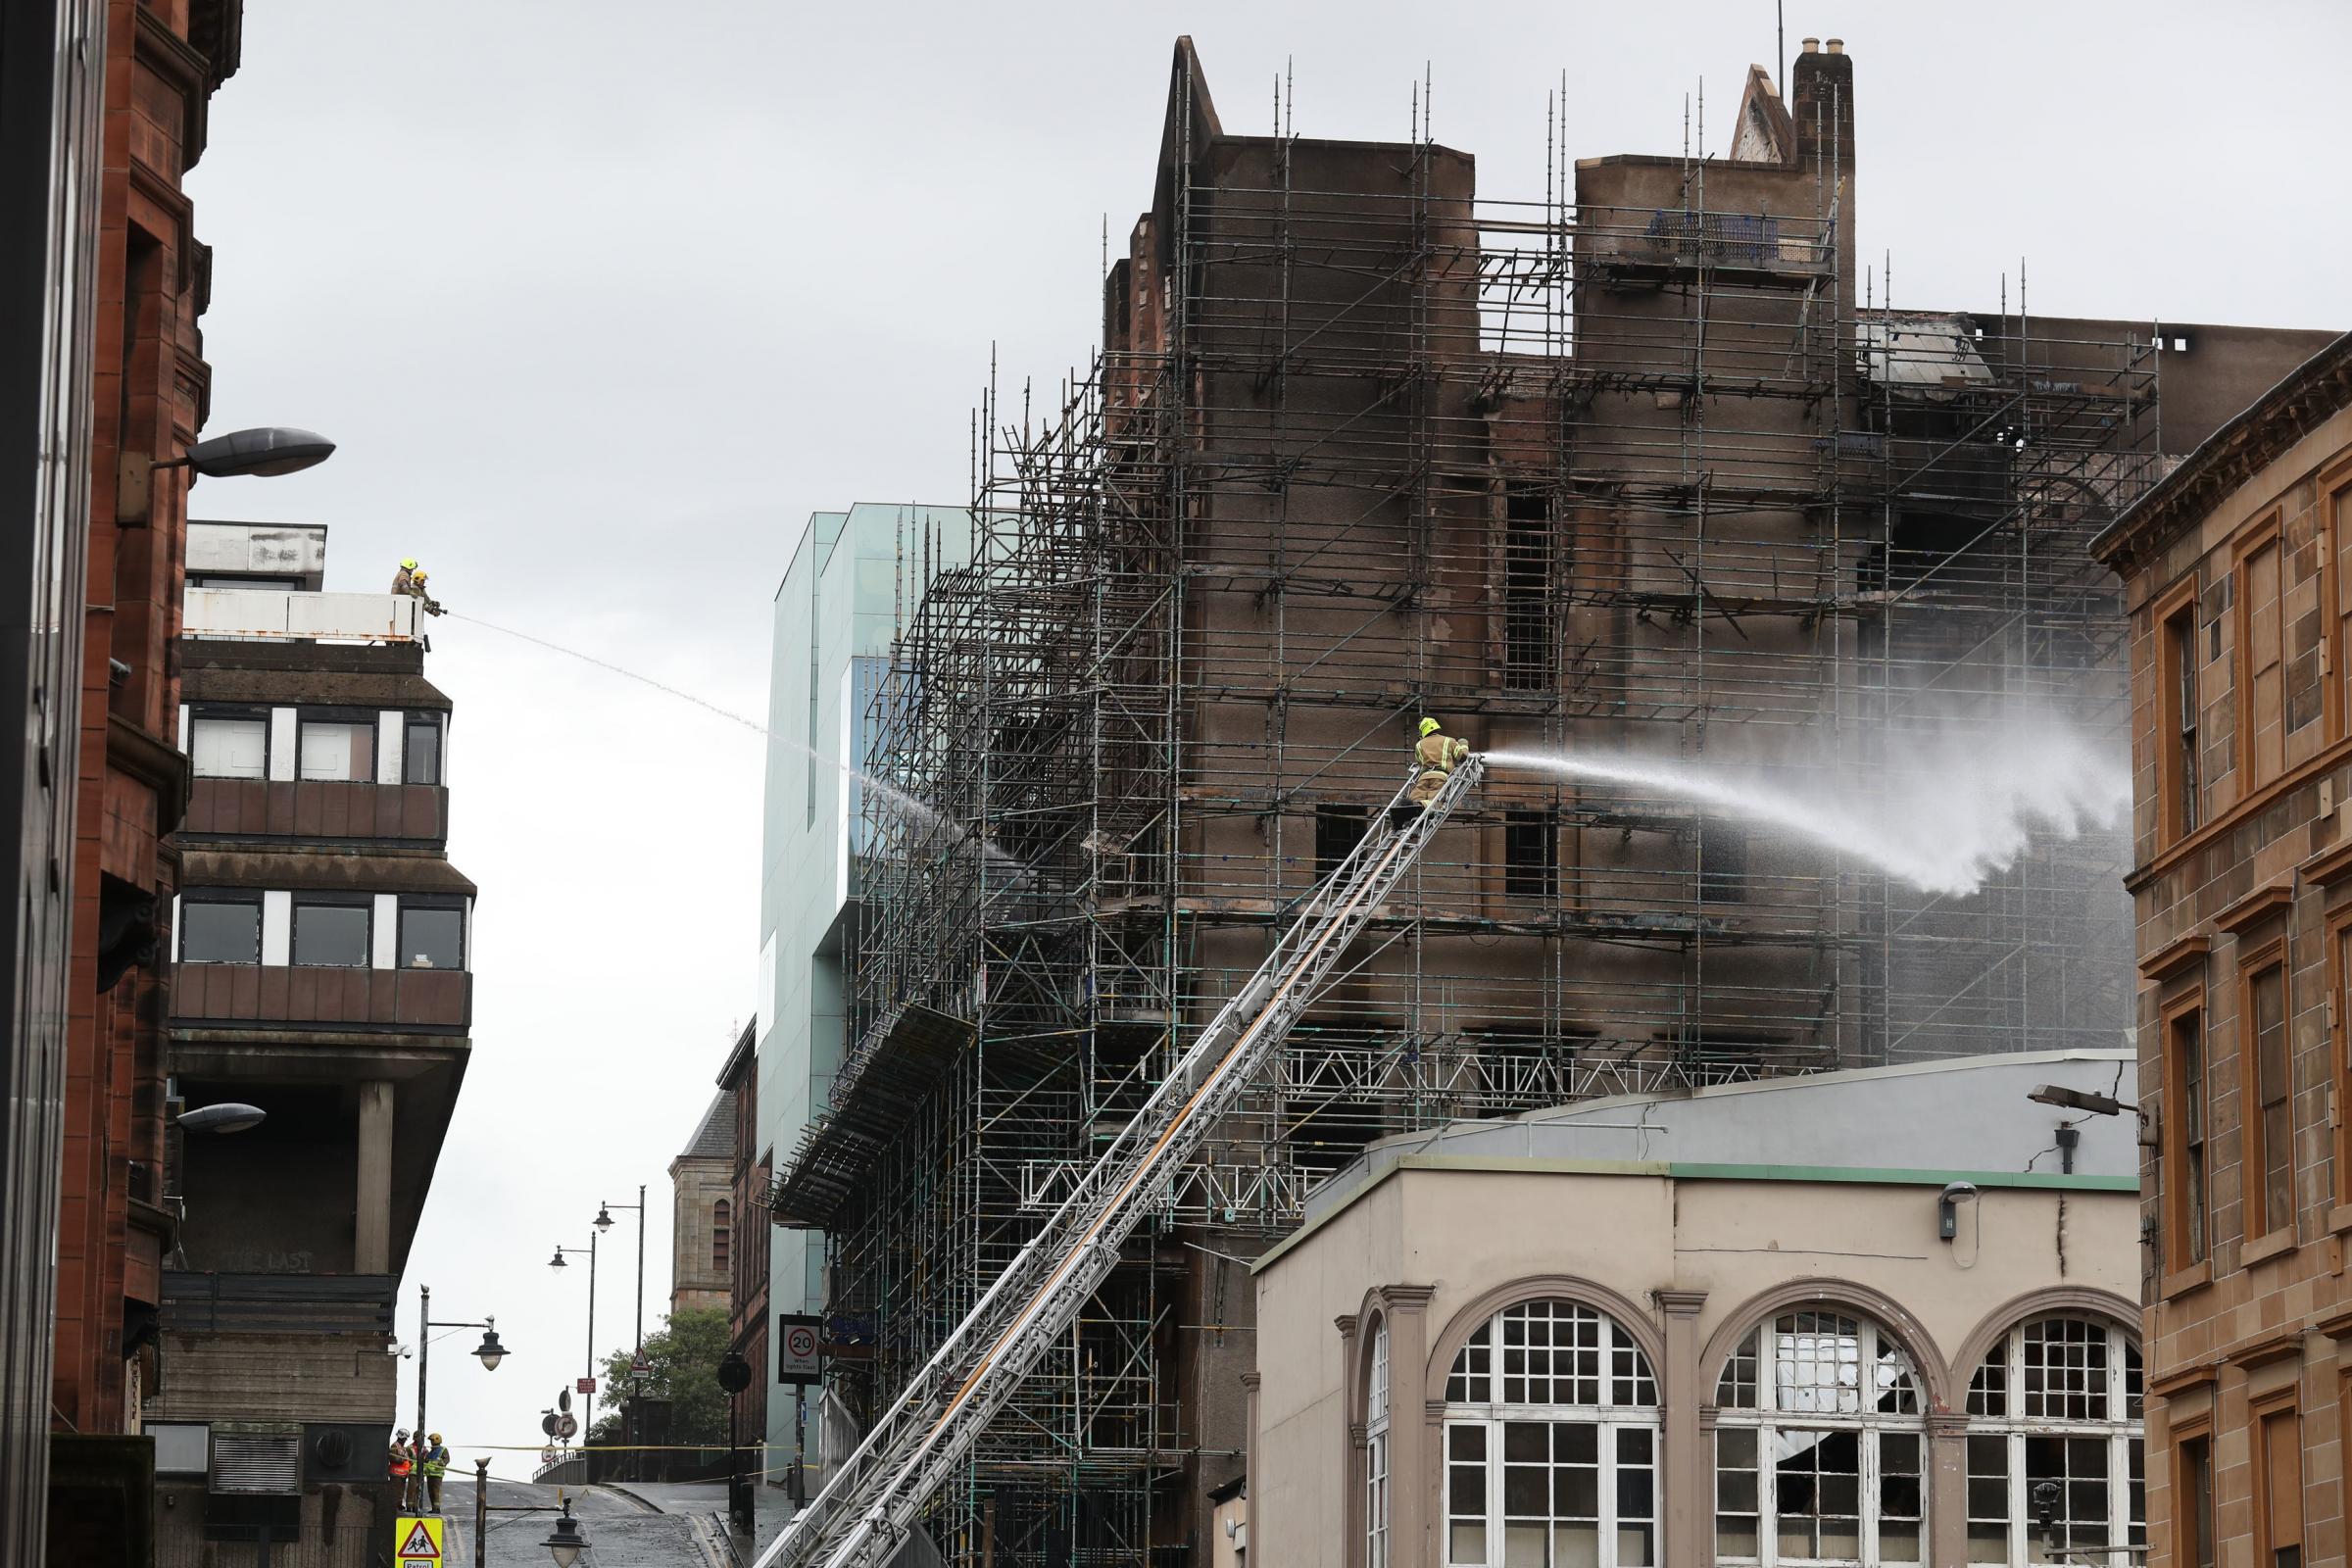 Firefighters dampening down following the fire at the Glasgow School of Art (GSA) in the historic Mackintosh Building in Glasgow in 2018.